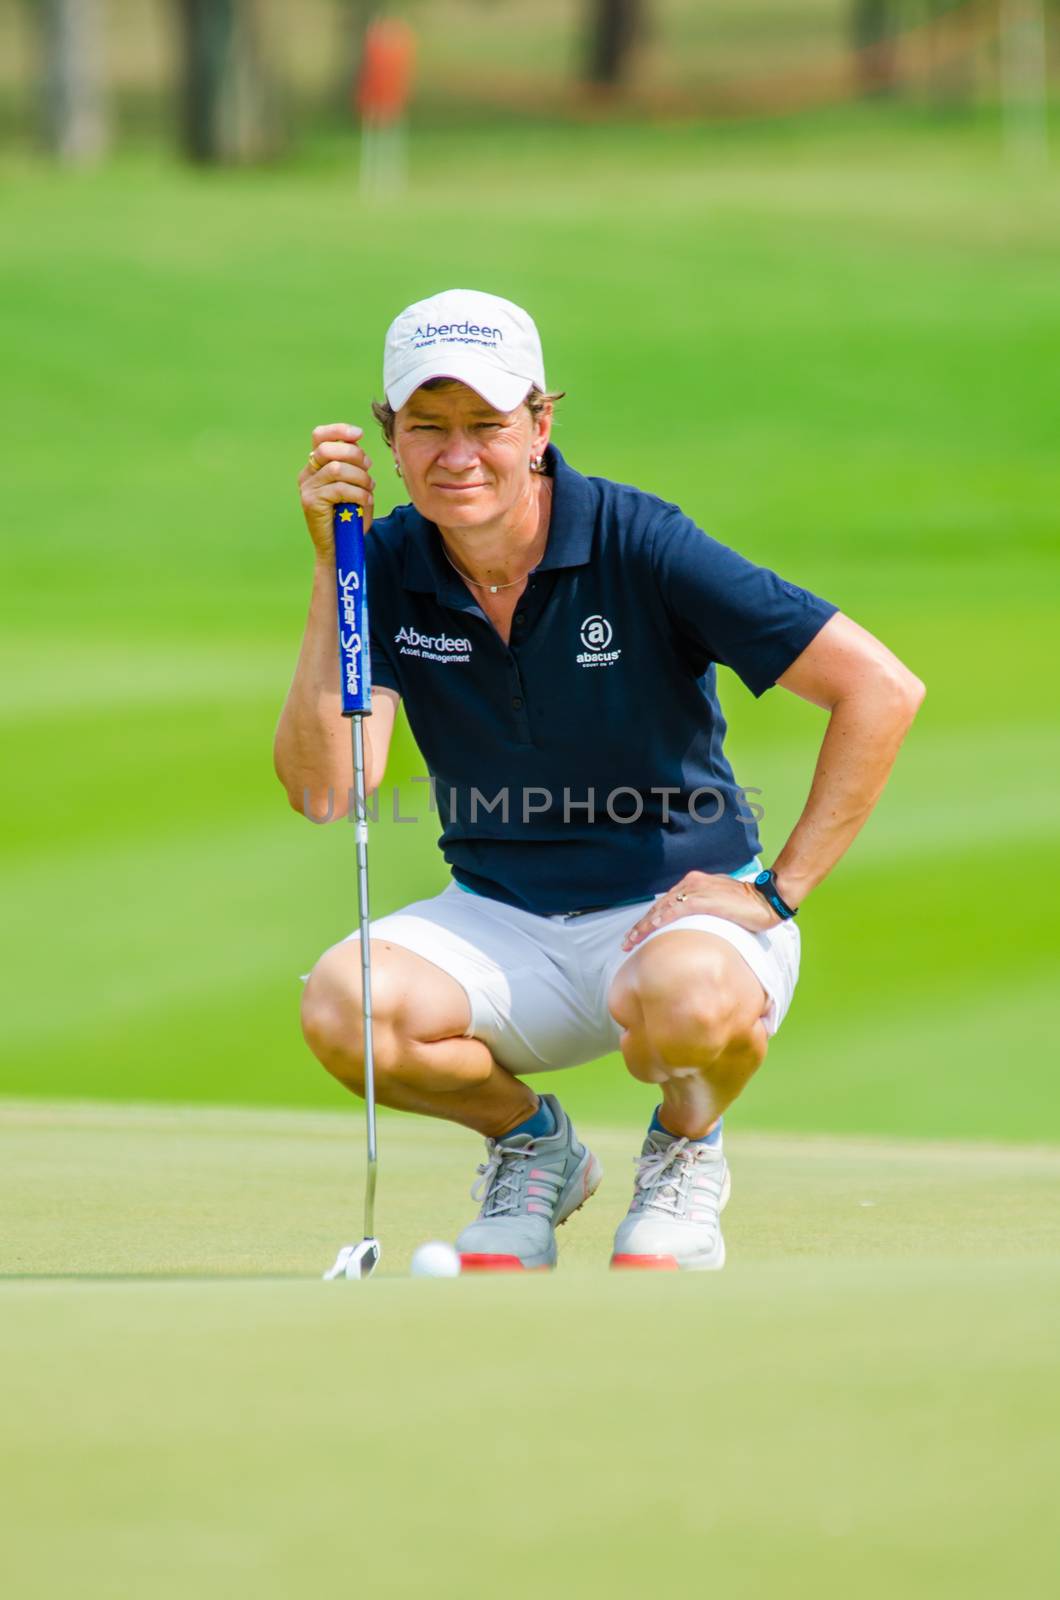 CHONBURI - MARCH 1: Catriona Matthew of Scotland in  Honda LPGA Thailand 2015 at Siam Country Club, Pattaya Old Course on March 1, 2015 in Chonburi, Thailand.